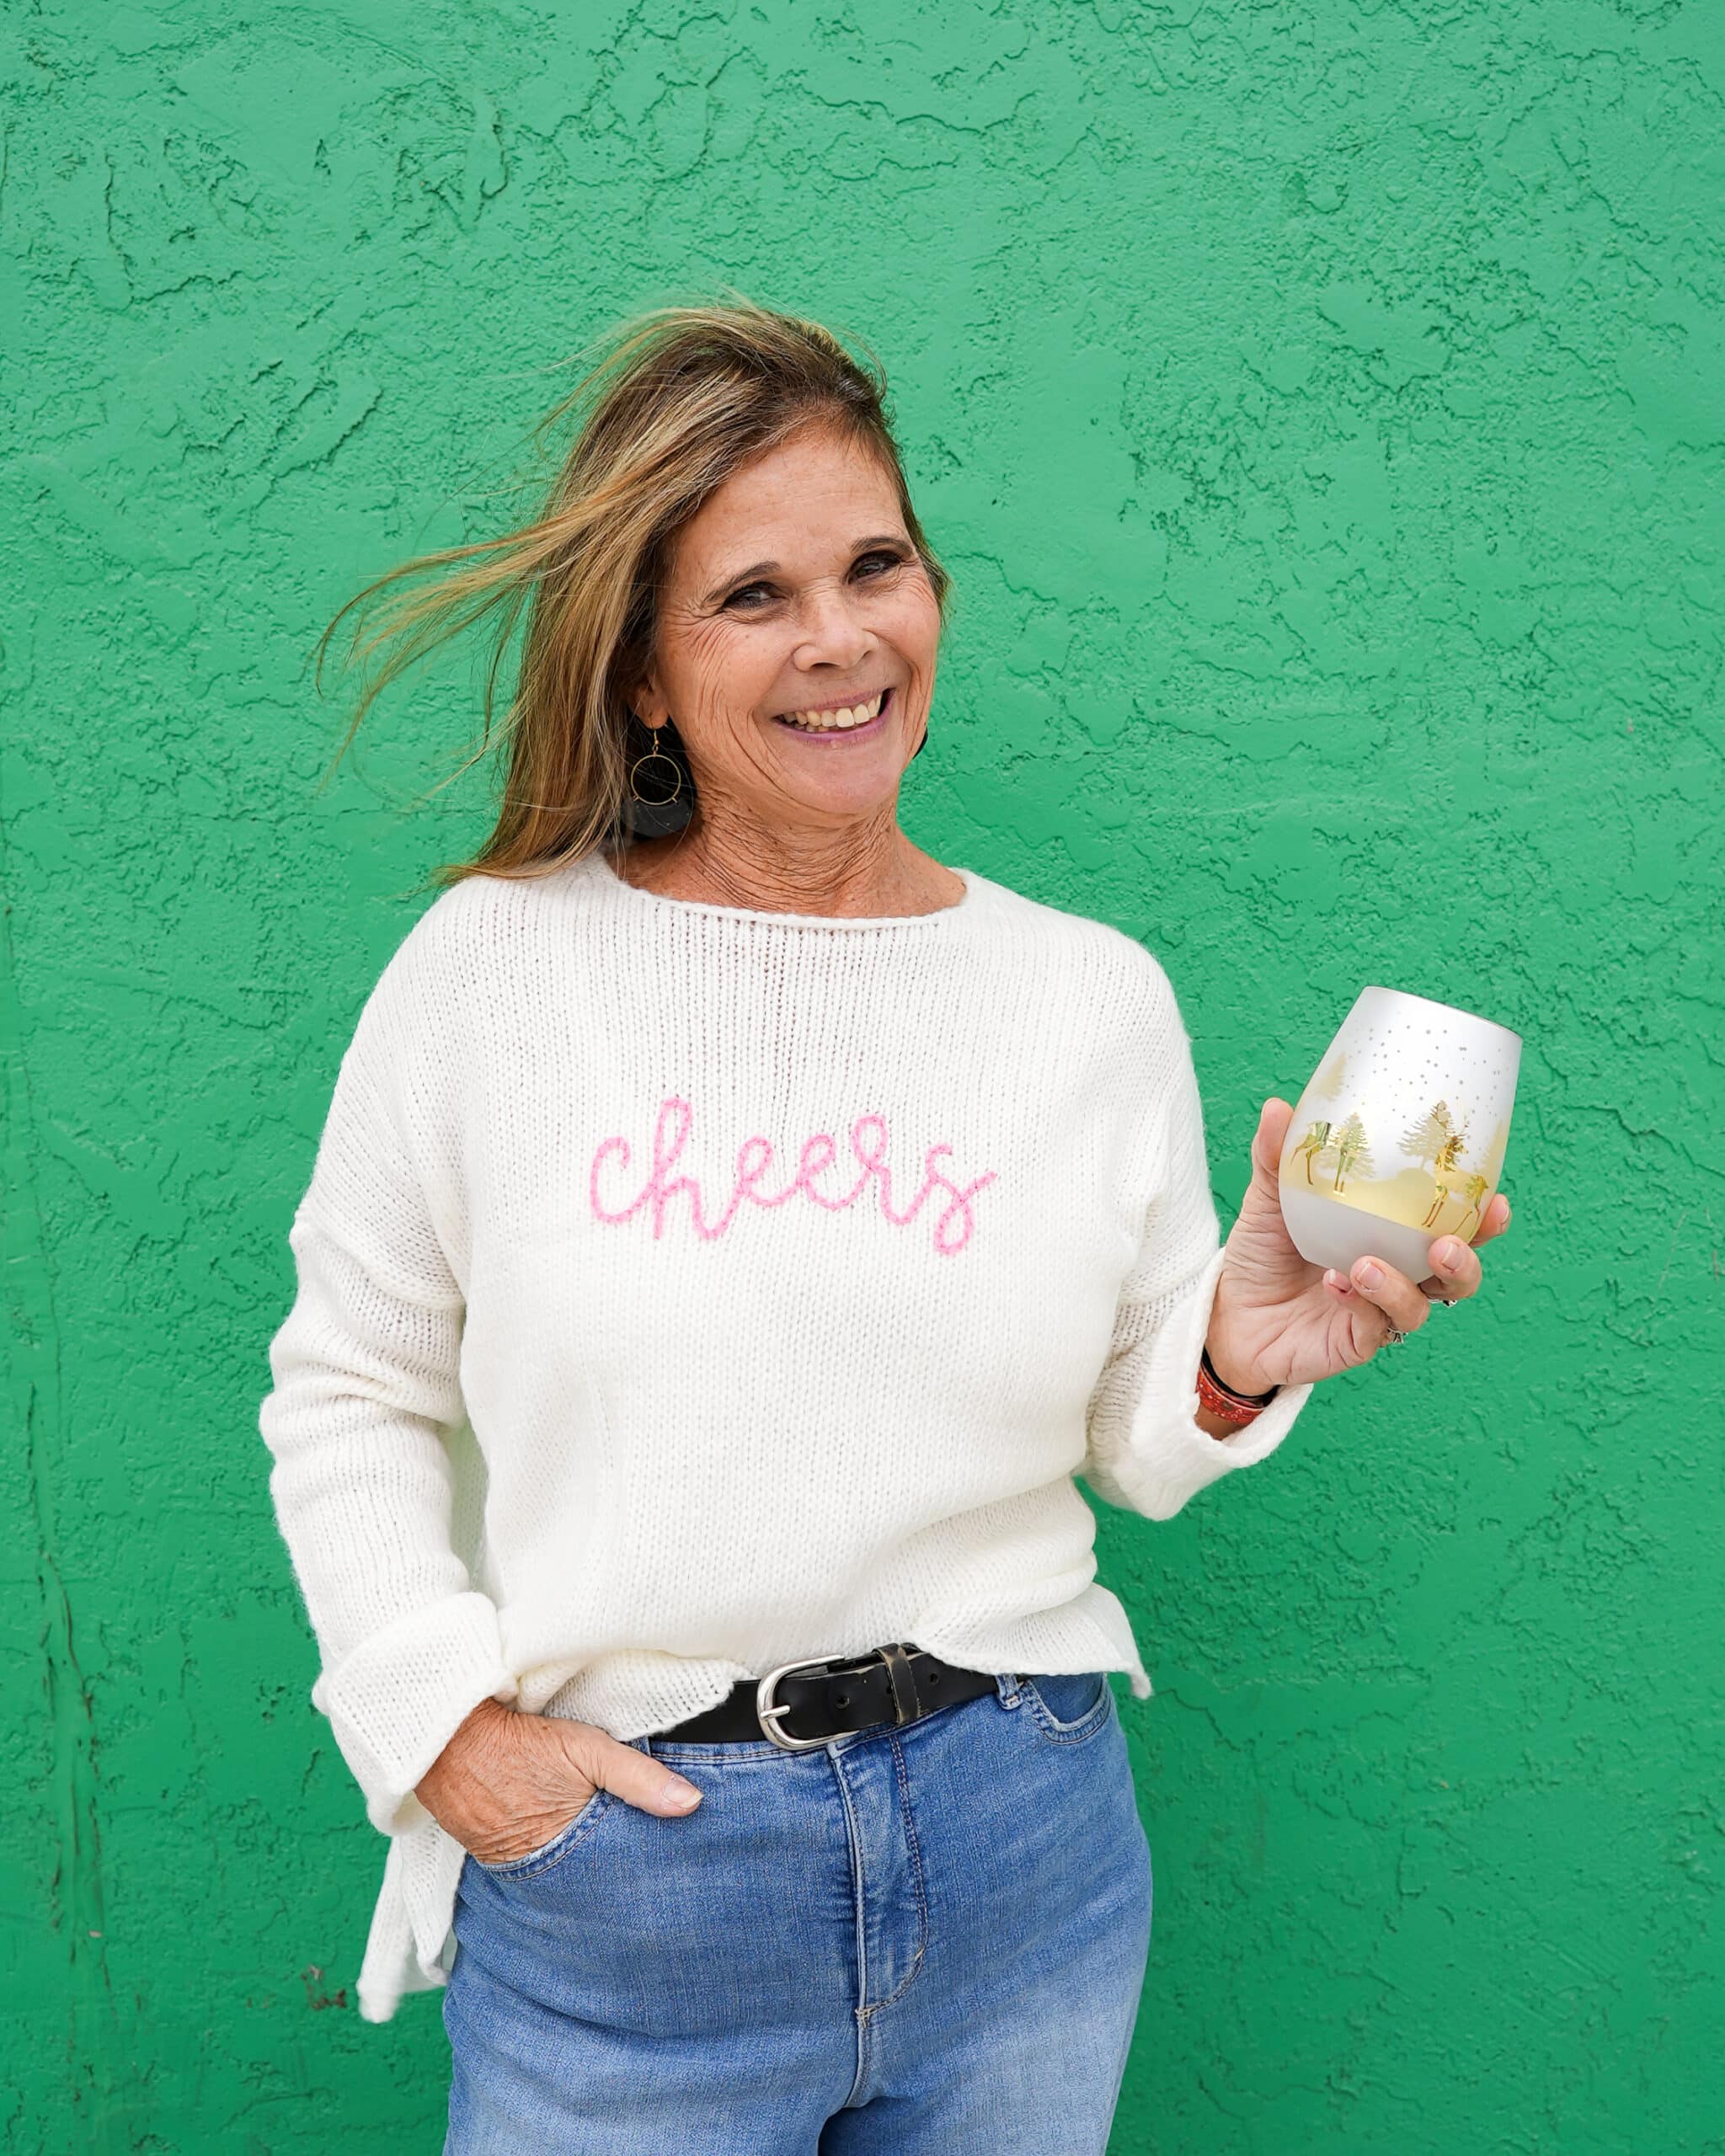 “Cheers” Cream Embroidered Sweater image